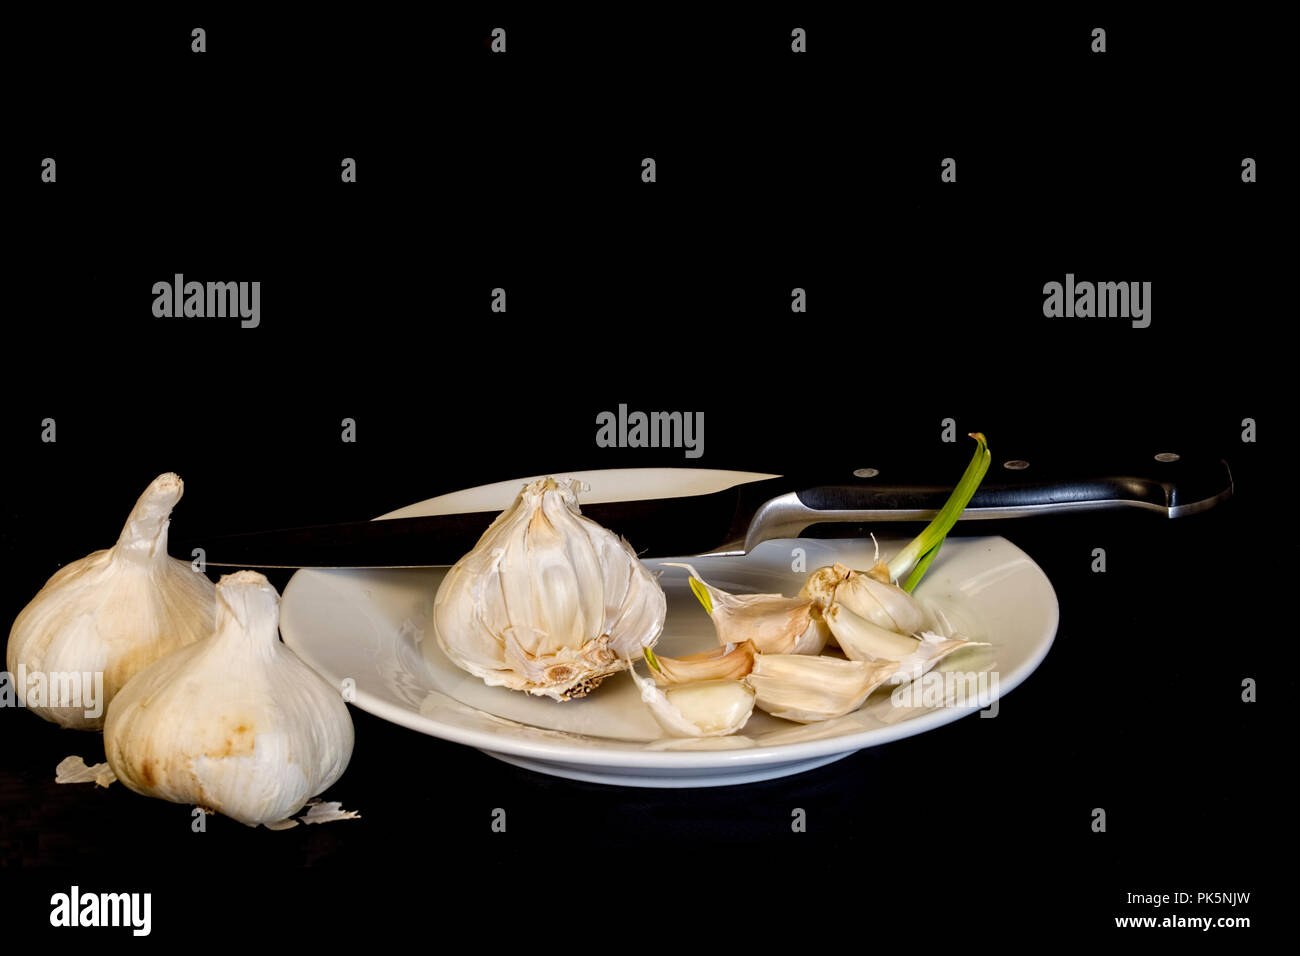 Garlic clusters and cloves closeup isolated on black background. Stock Photo